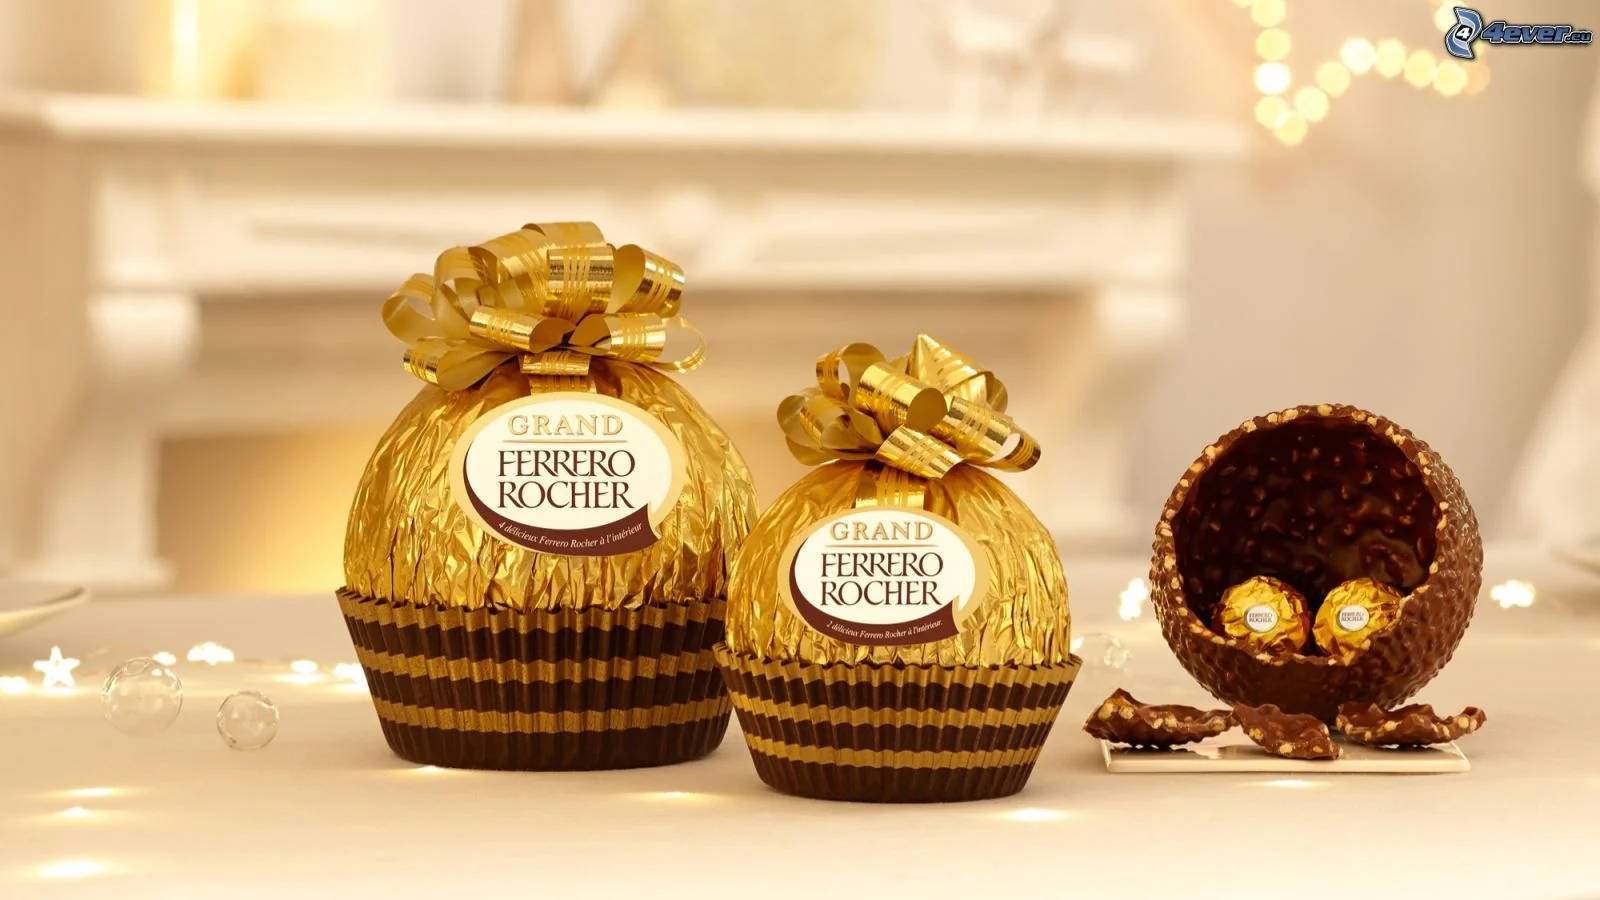 Exquisite Gold Foil Packaging Of Ferrero Rocher Chocolates Background